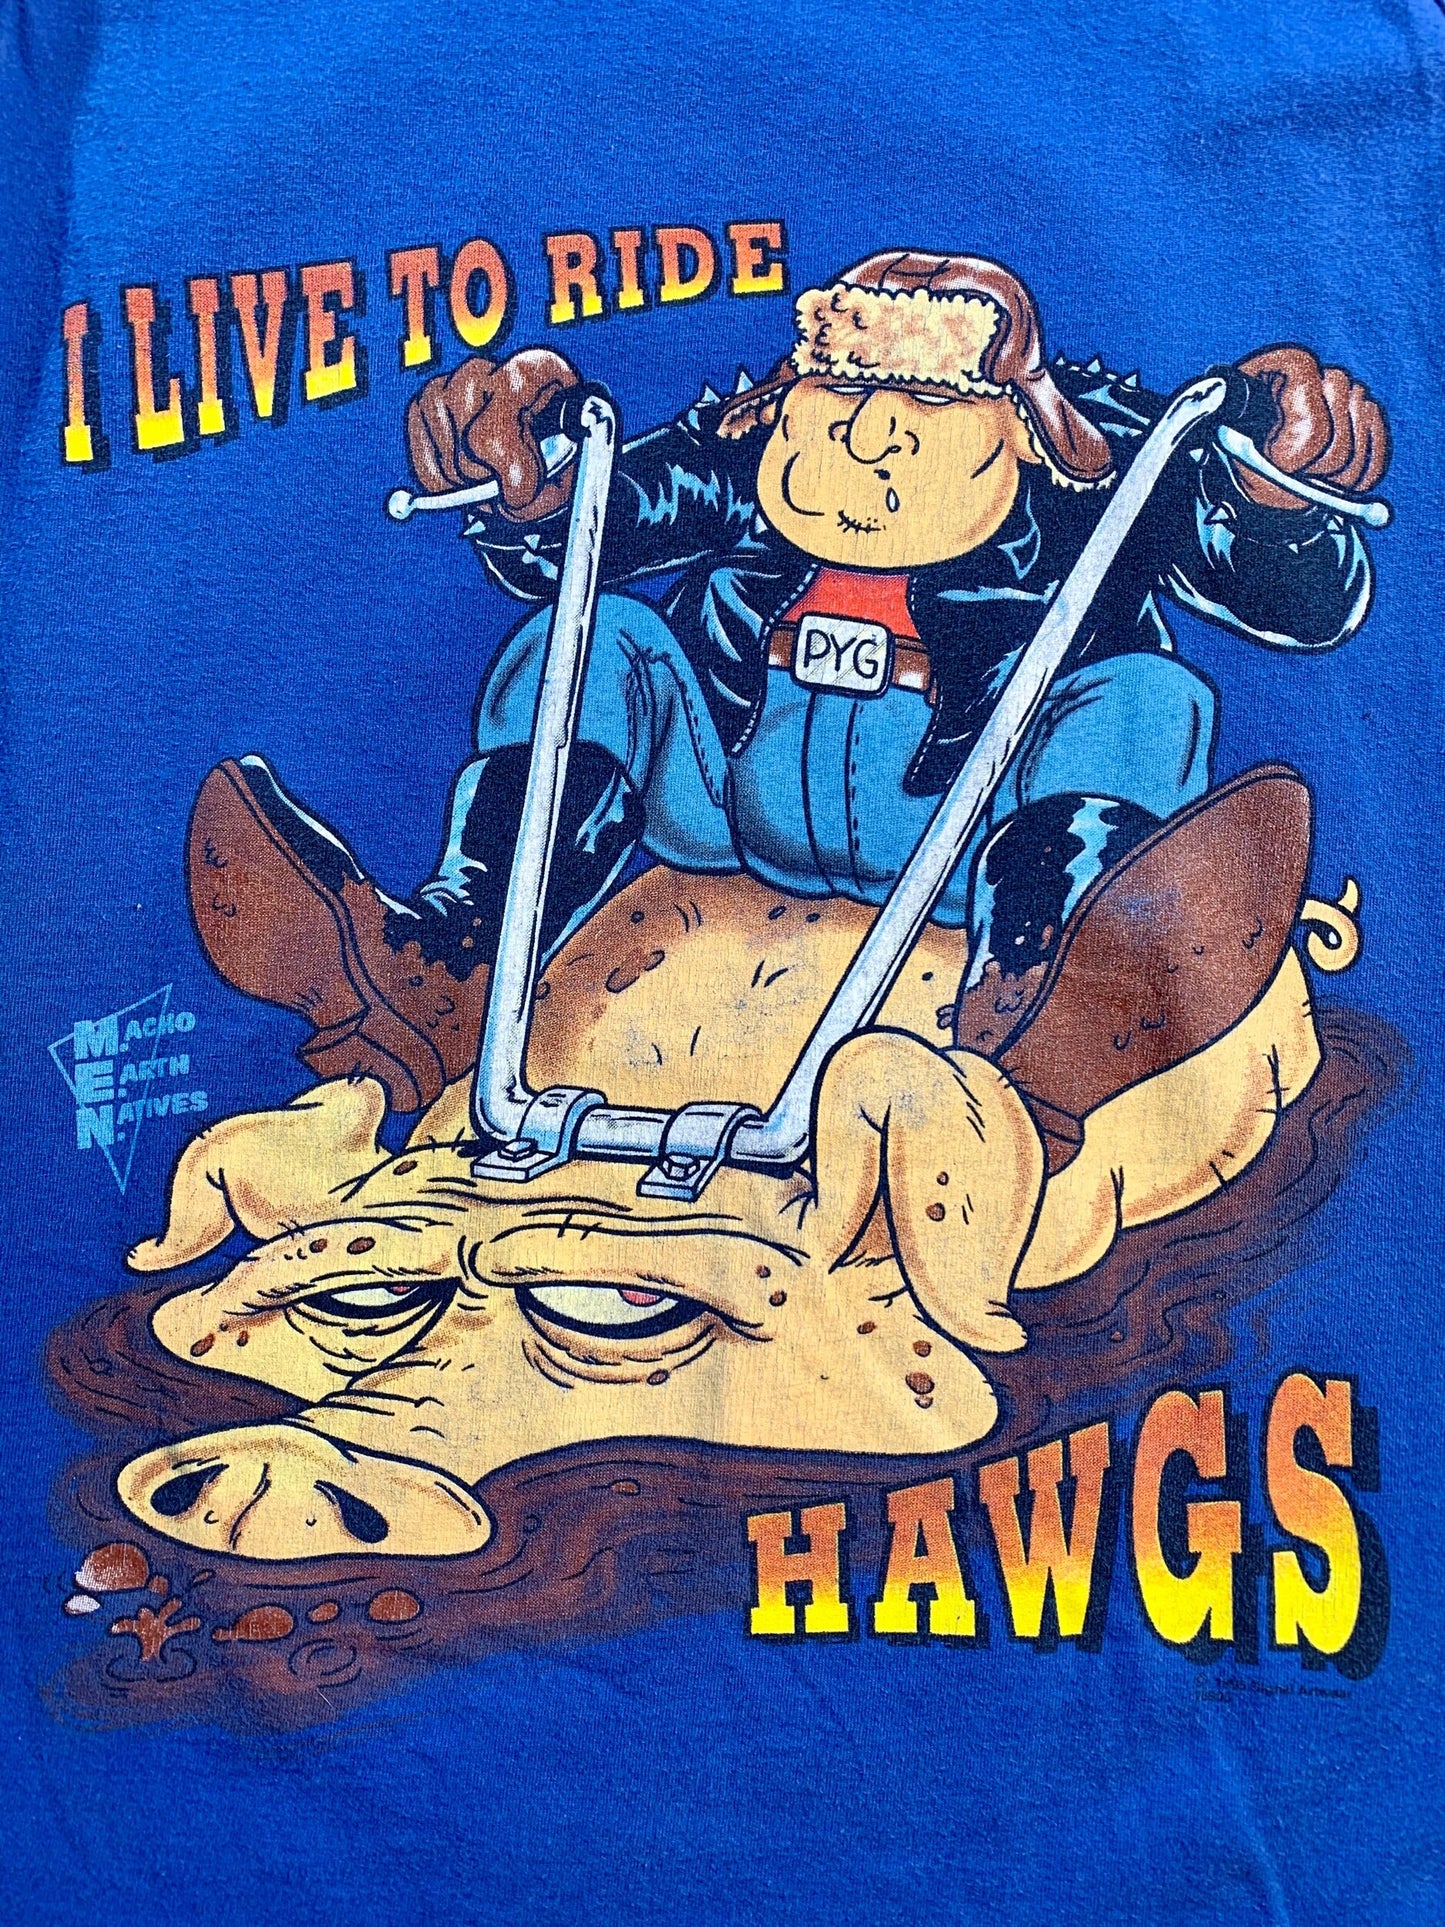 Vintage I Live To Ride Hawgs Tank Top